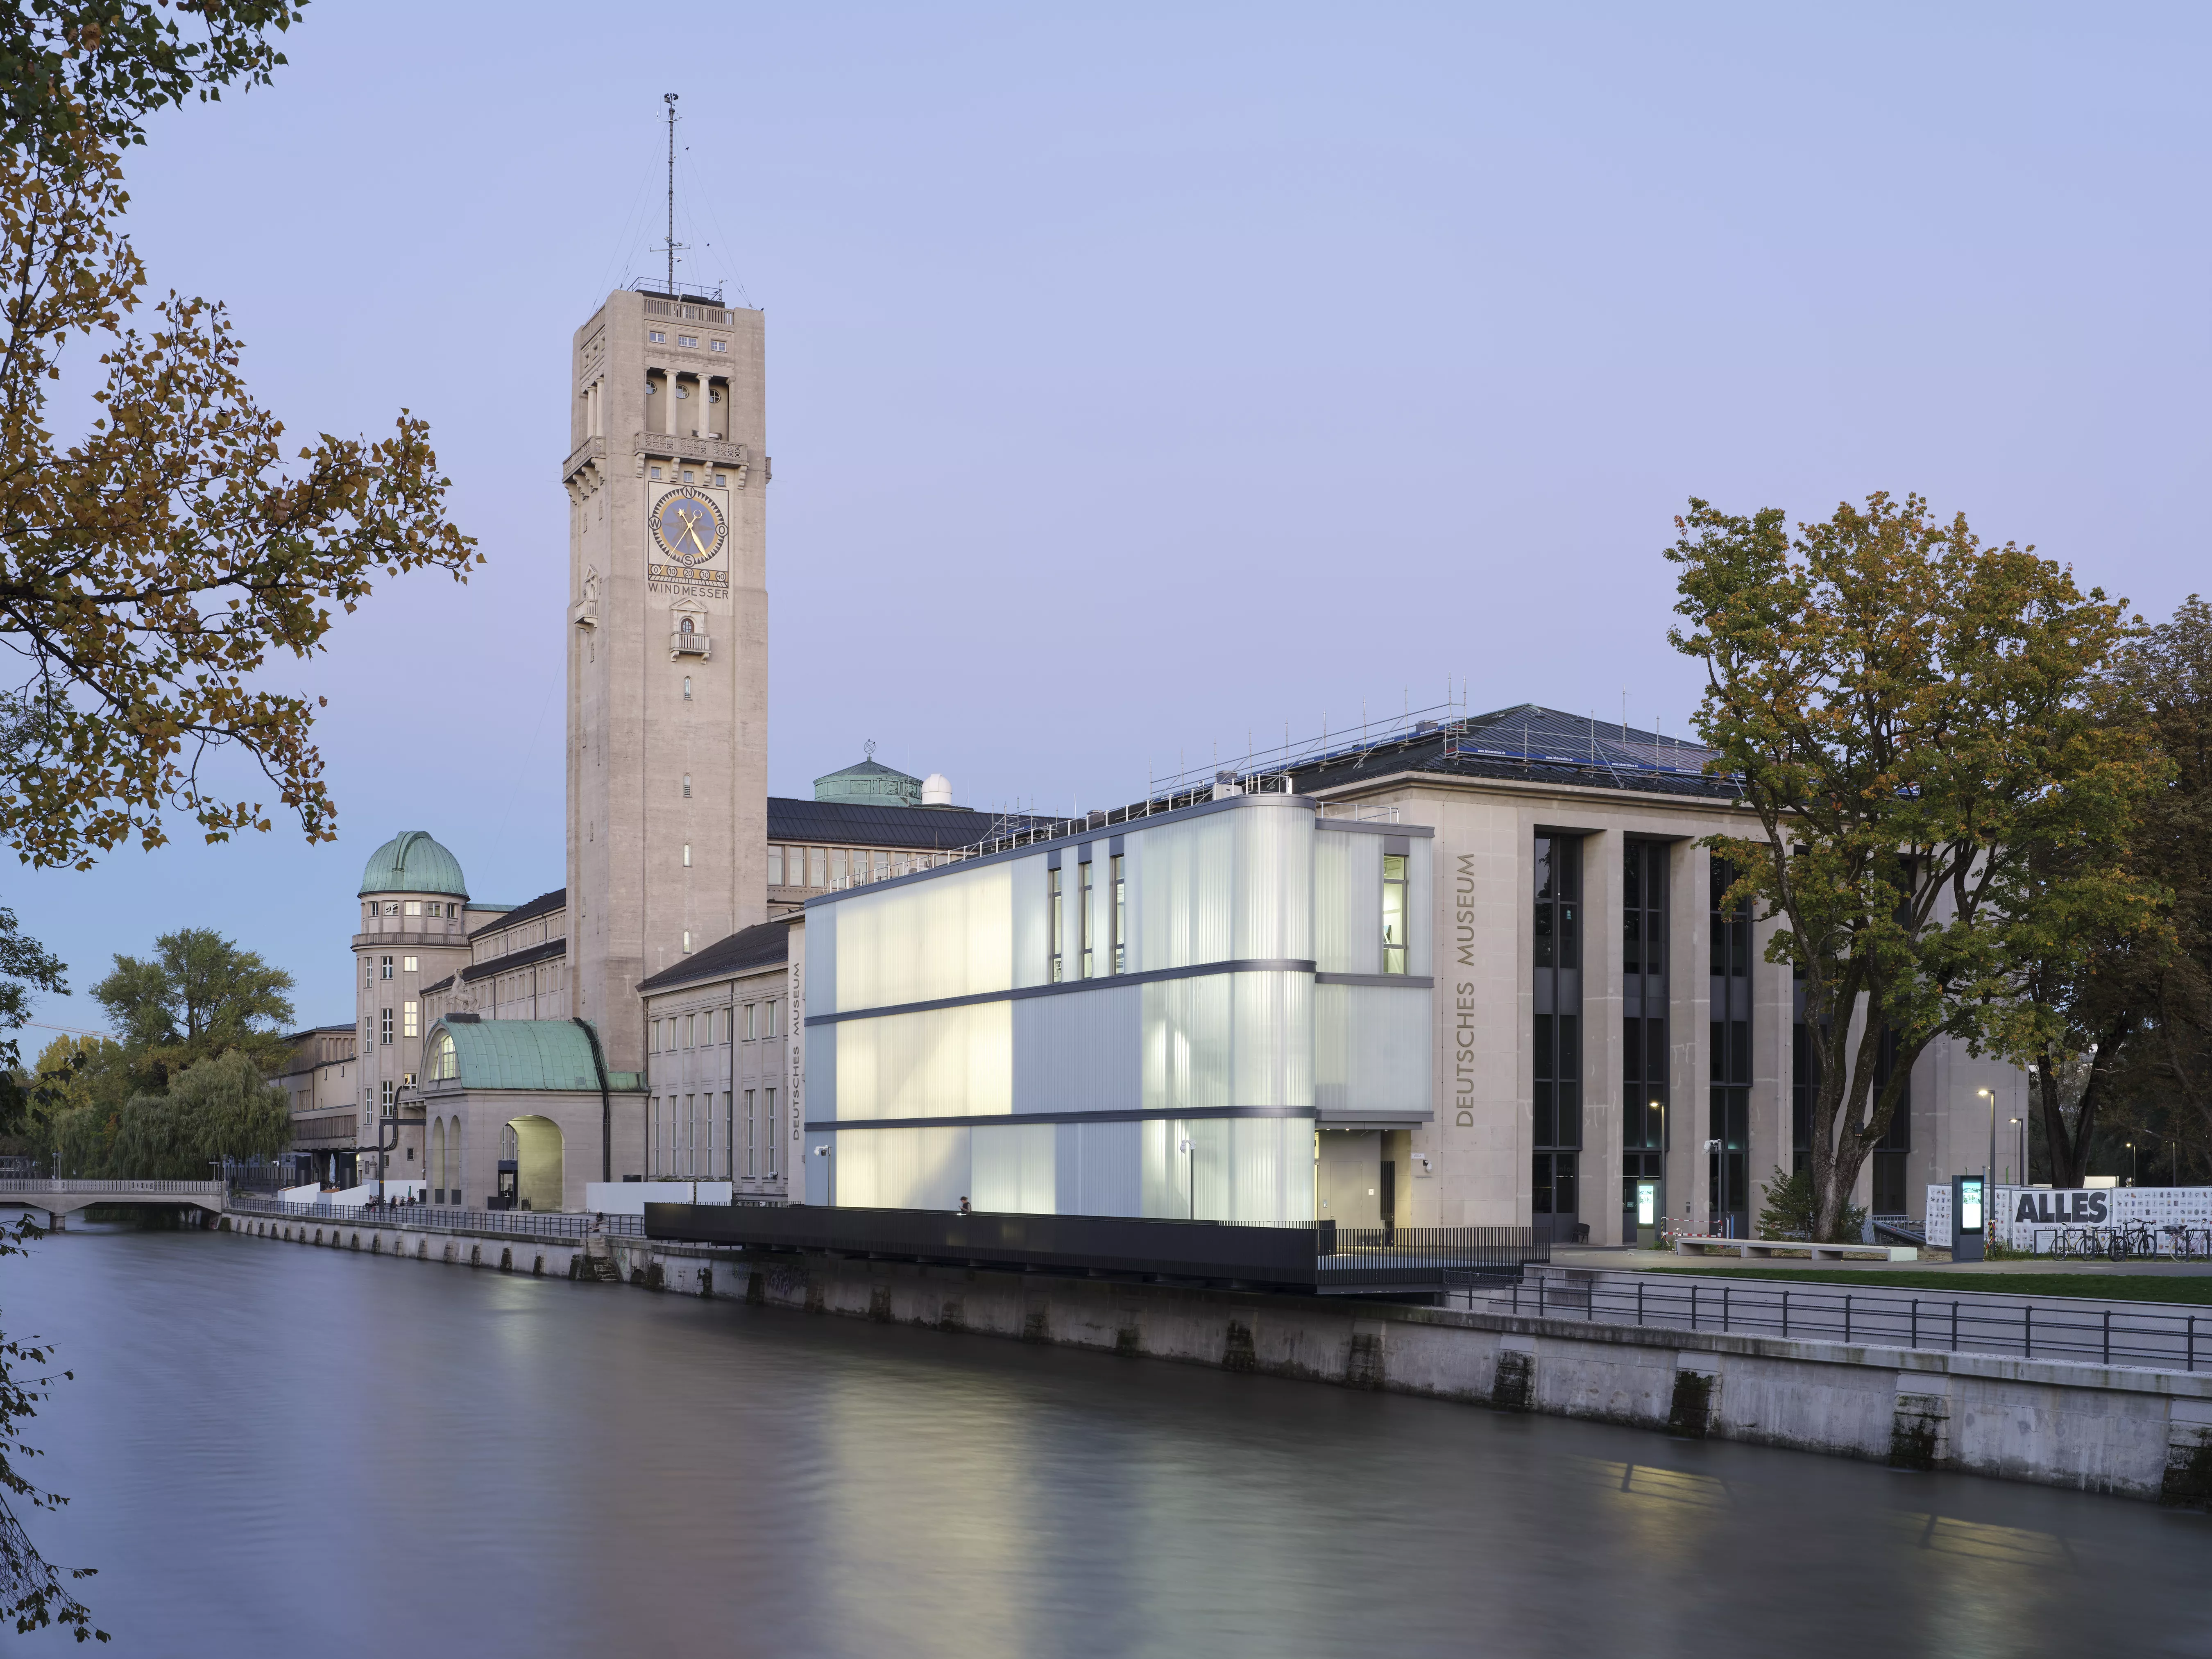 New exhibition at the Deutsches Museum uses high-tech HIMACS walls